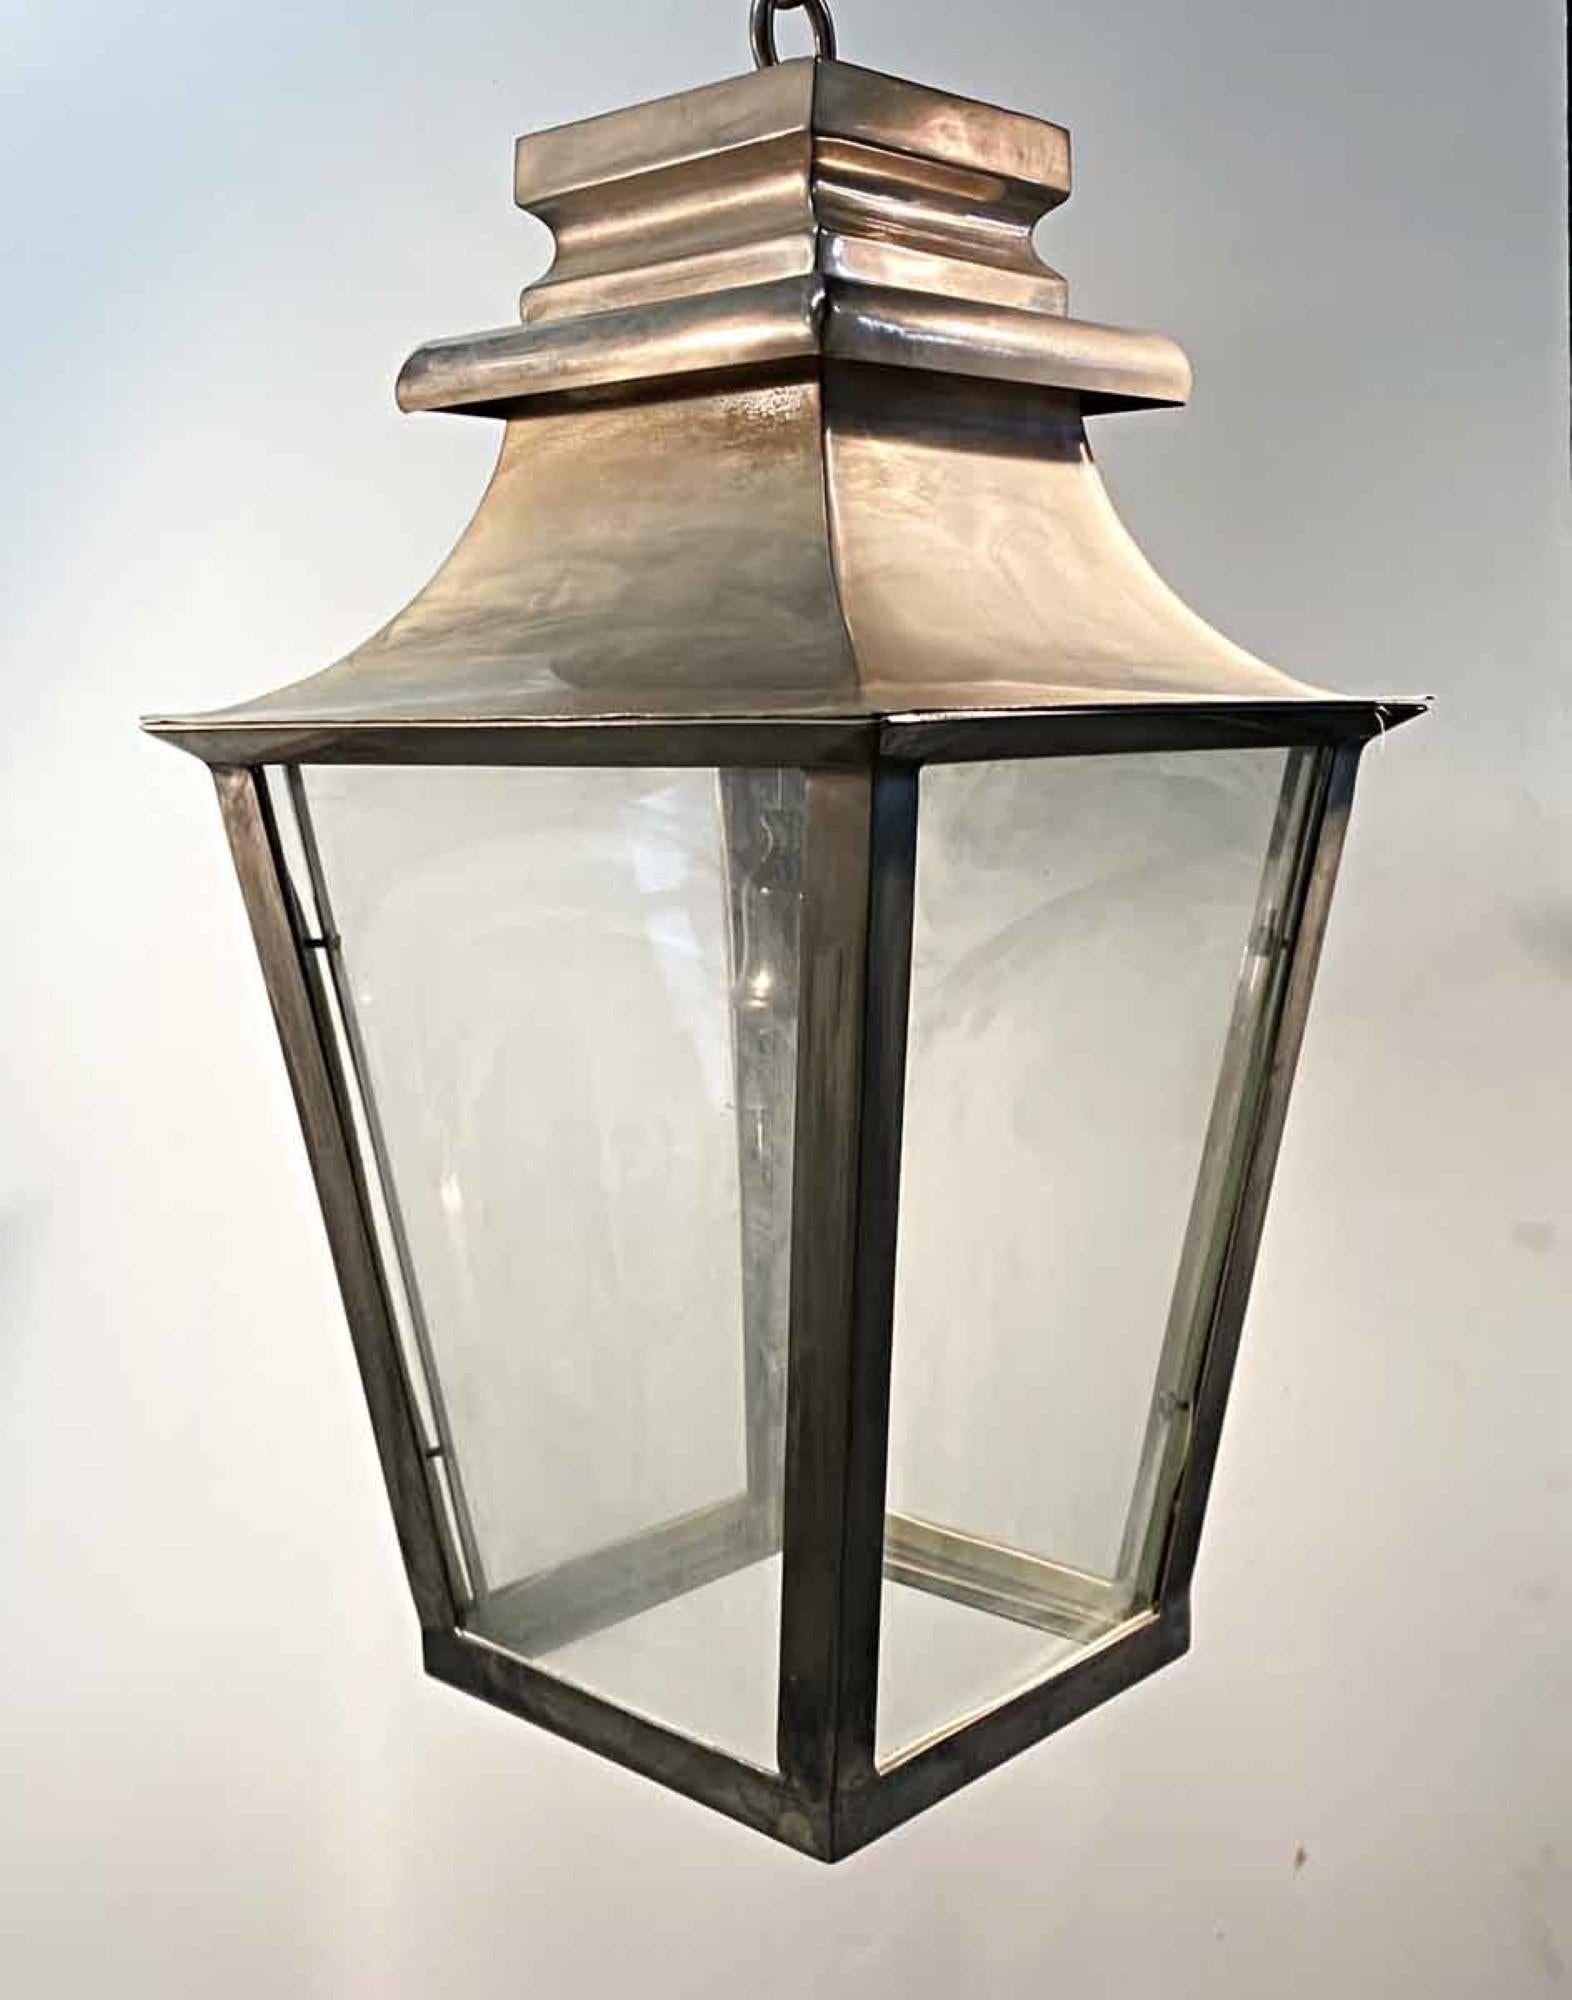 1990s brass with nickel finish single light lantern. Suitable for a porch or entry way. Price includes restoration. Please specify the overall drop needed. This can be seen at our 400 Gilligan St location in Scranton. PA.